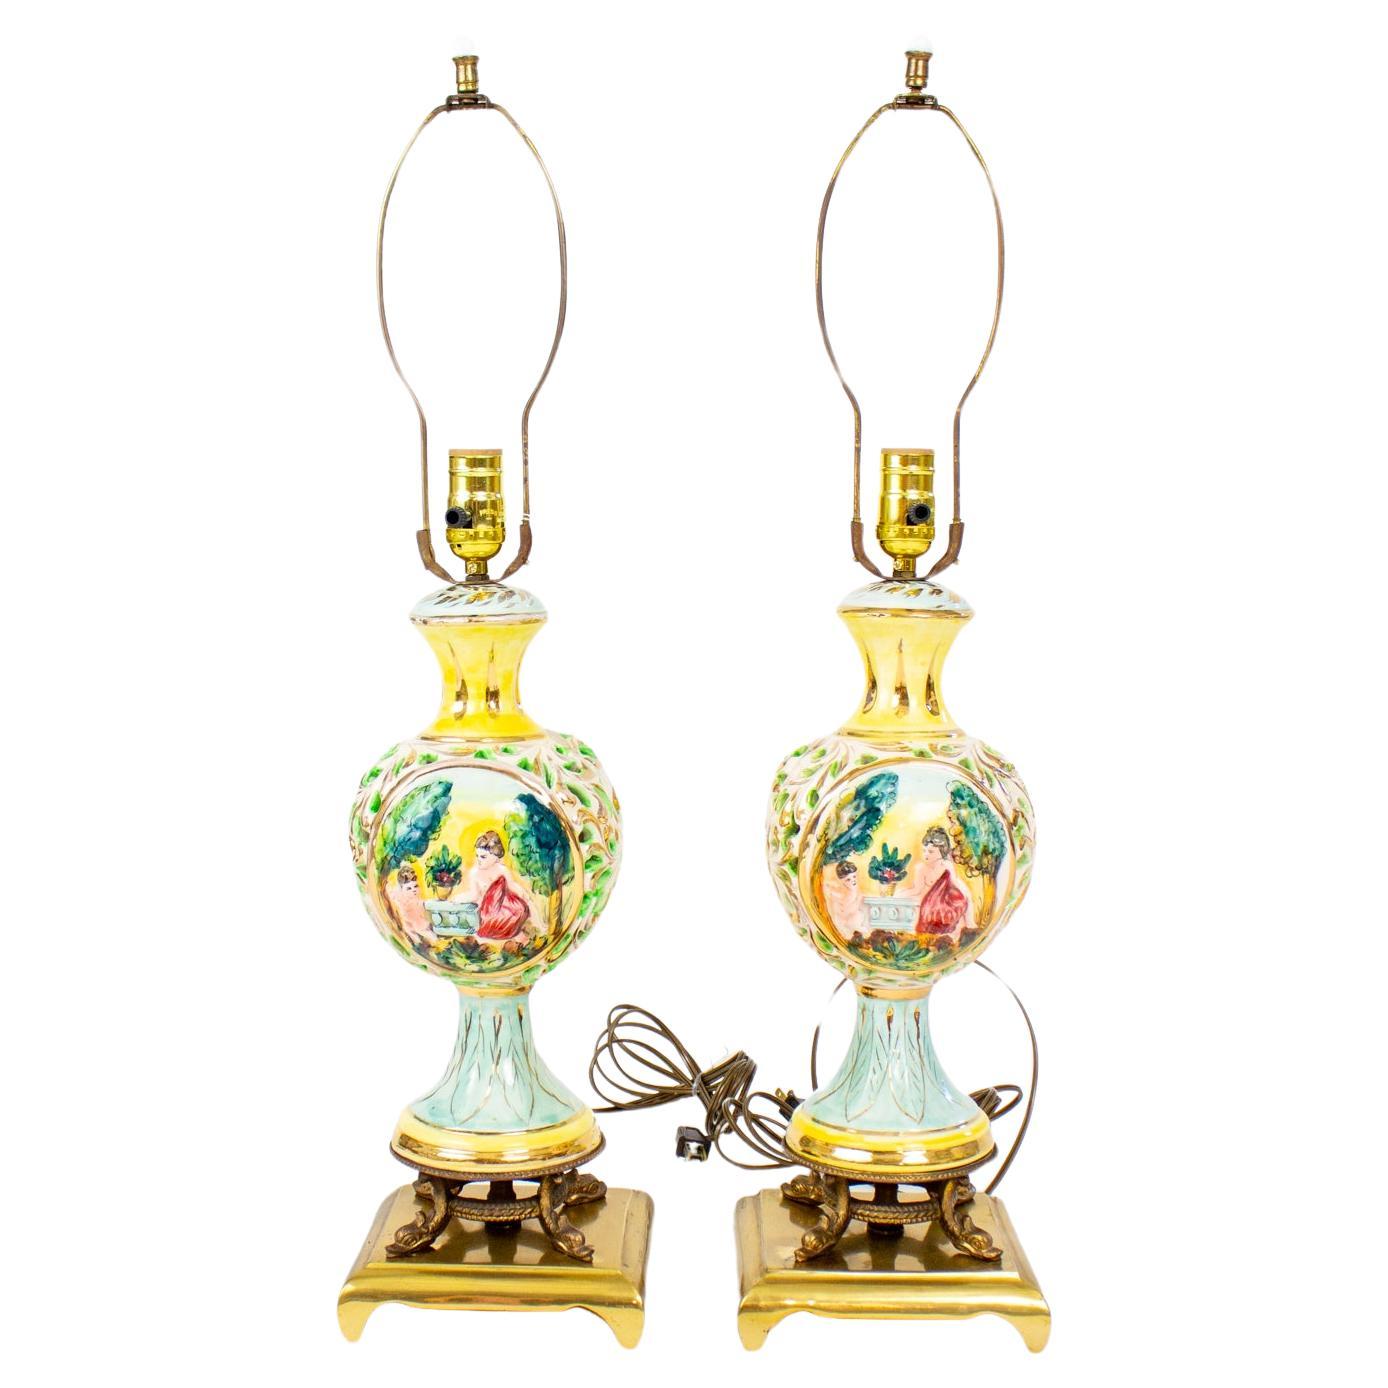 Mid 20th Century Capodimonte Yellow And Sky Blue Table Lamps - a Pair For Sale